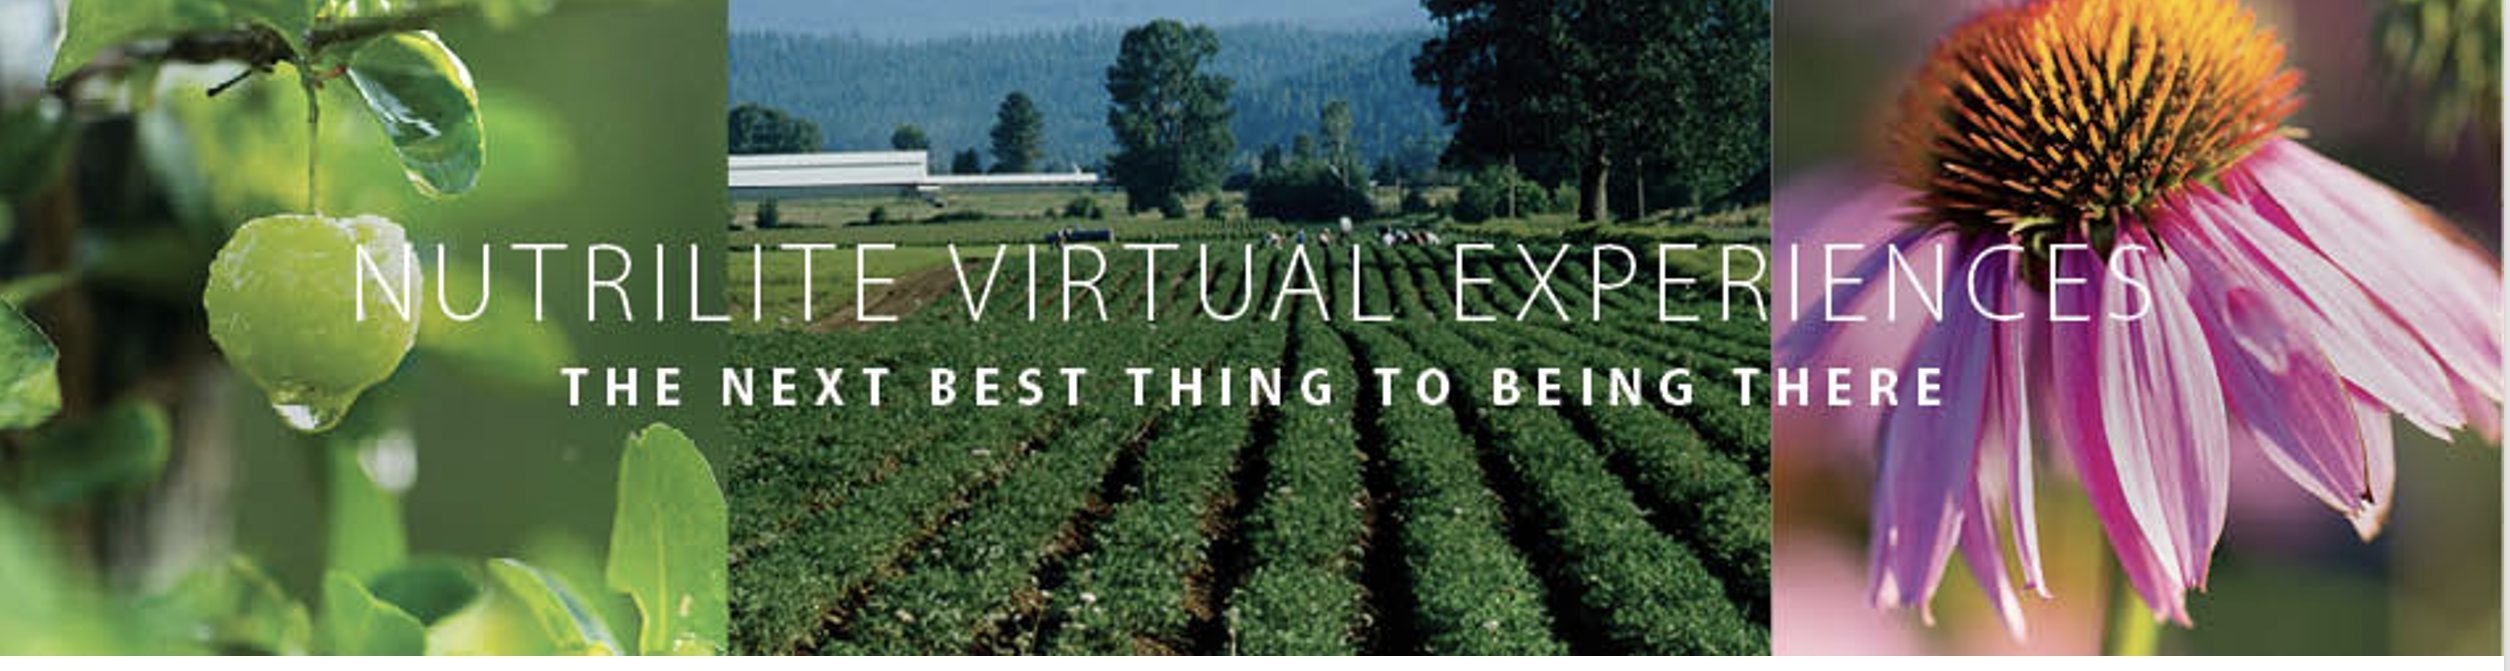 Nutrilite Virtual Experiences: The next best thing to being there.